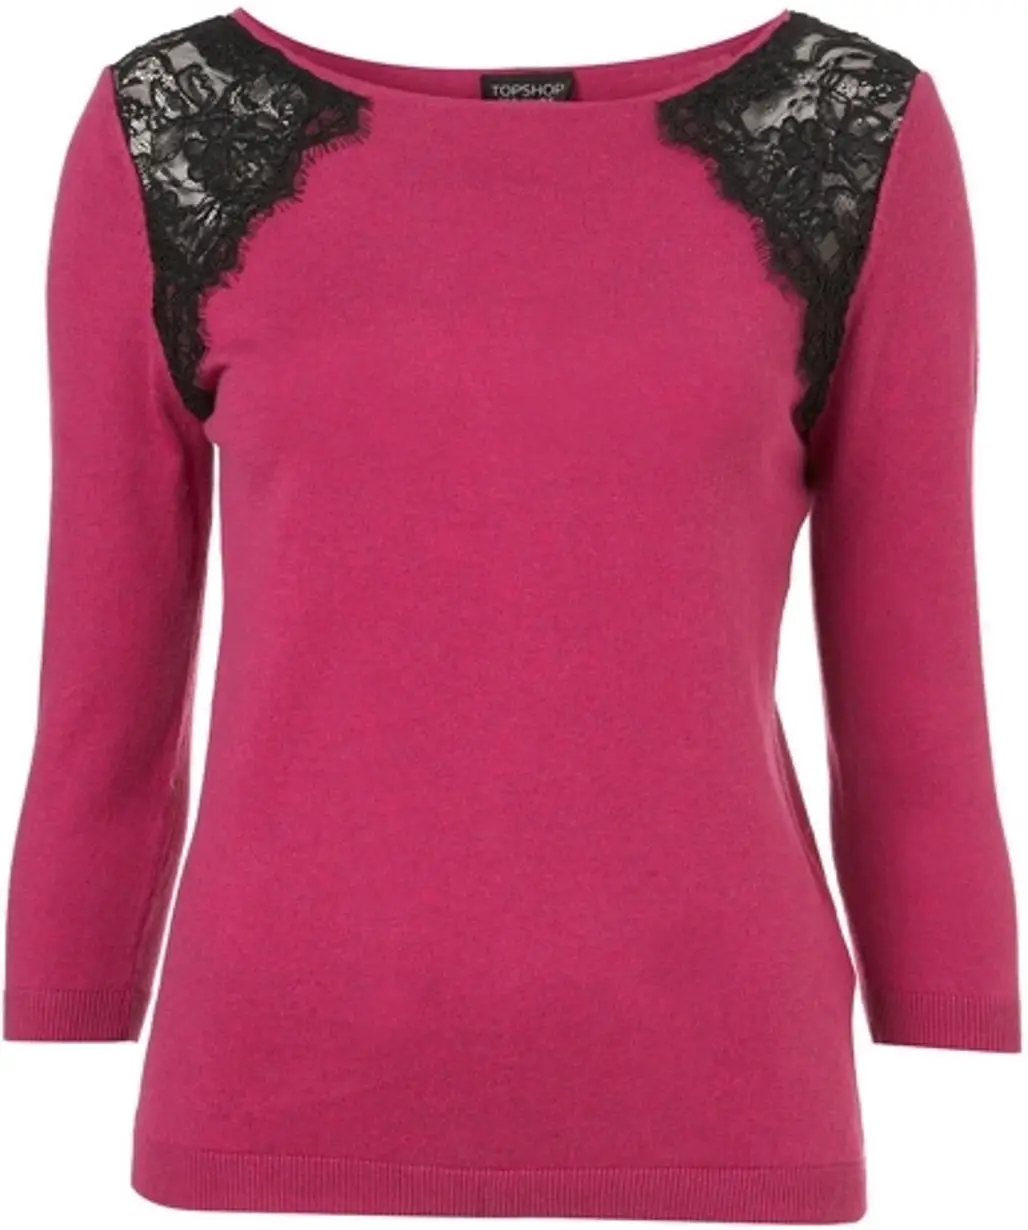 Knitted Shoulder Lace Top